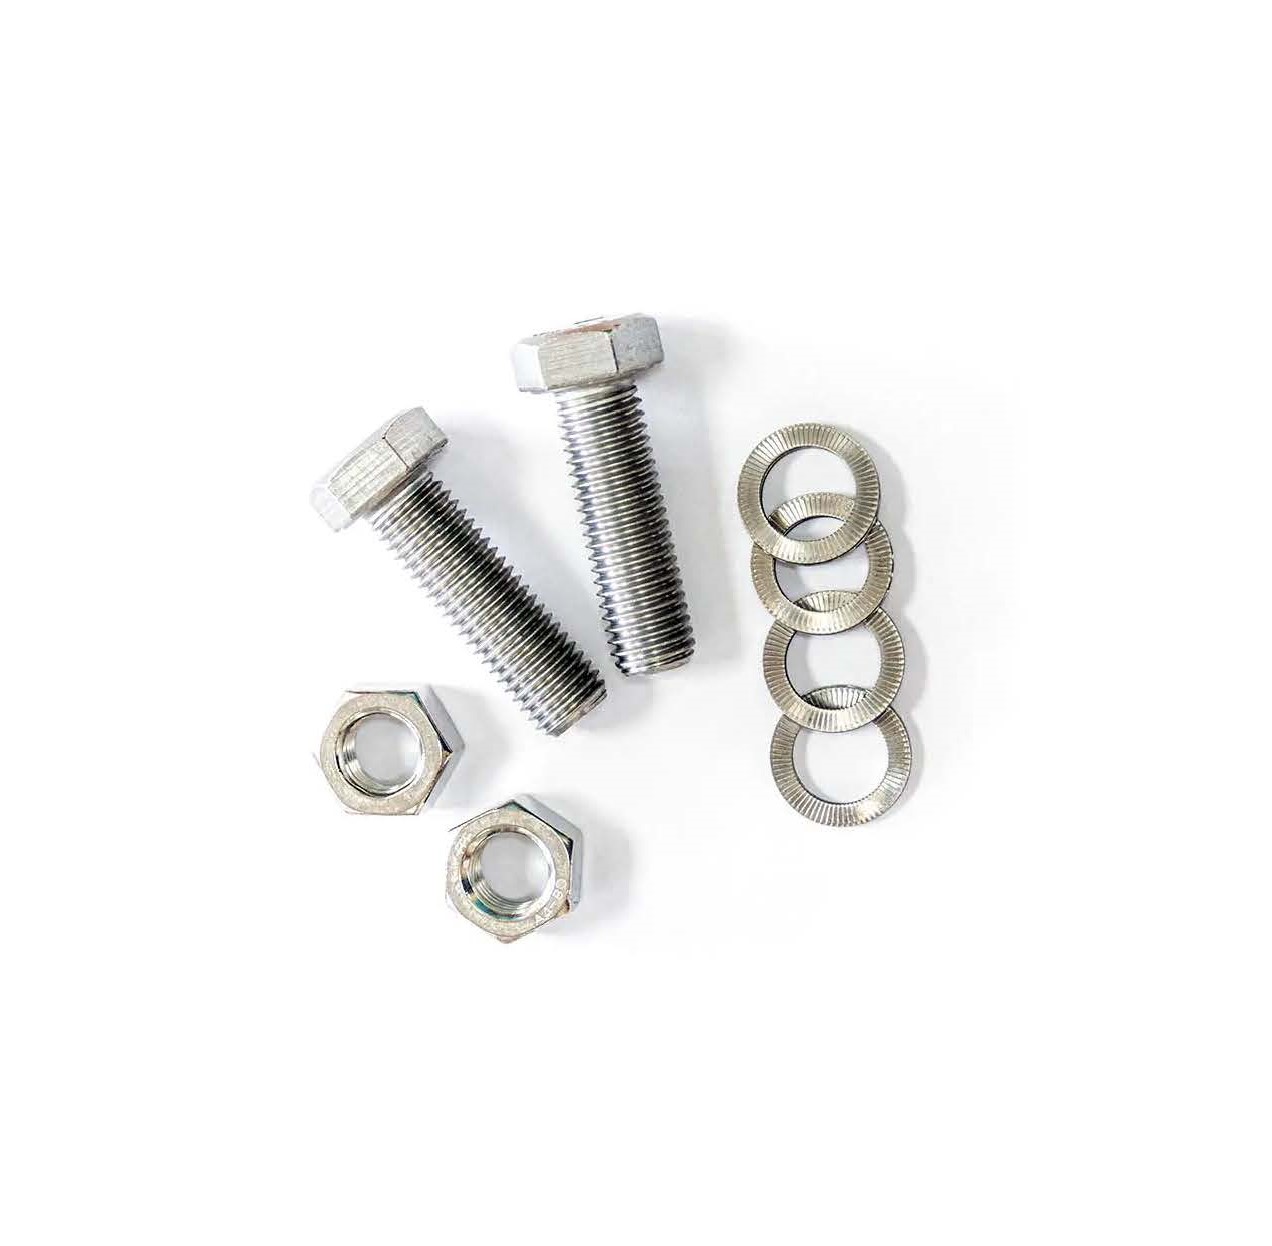 Crossing Bolt Set. Contains 2 X Bolts, 2 X Nuts, 4 X Special Locking Washers